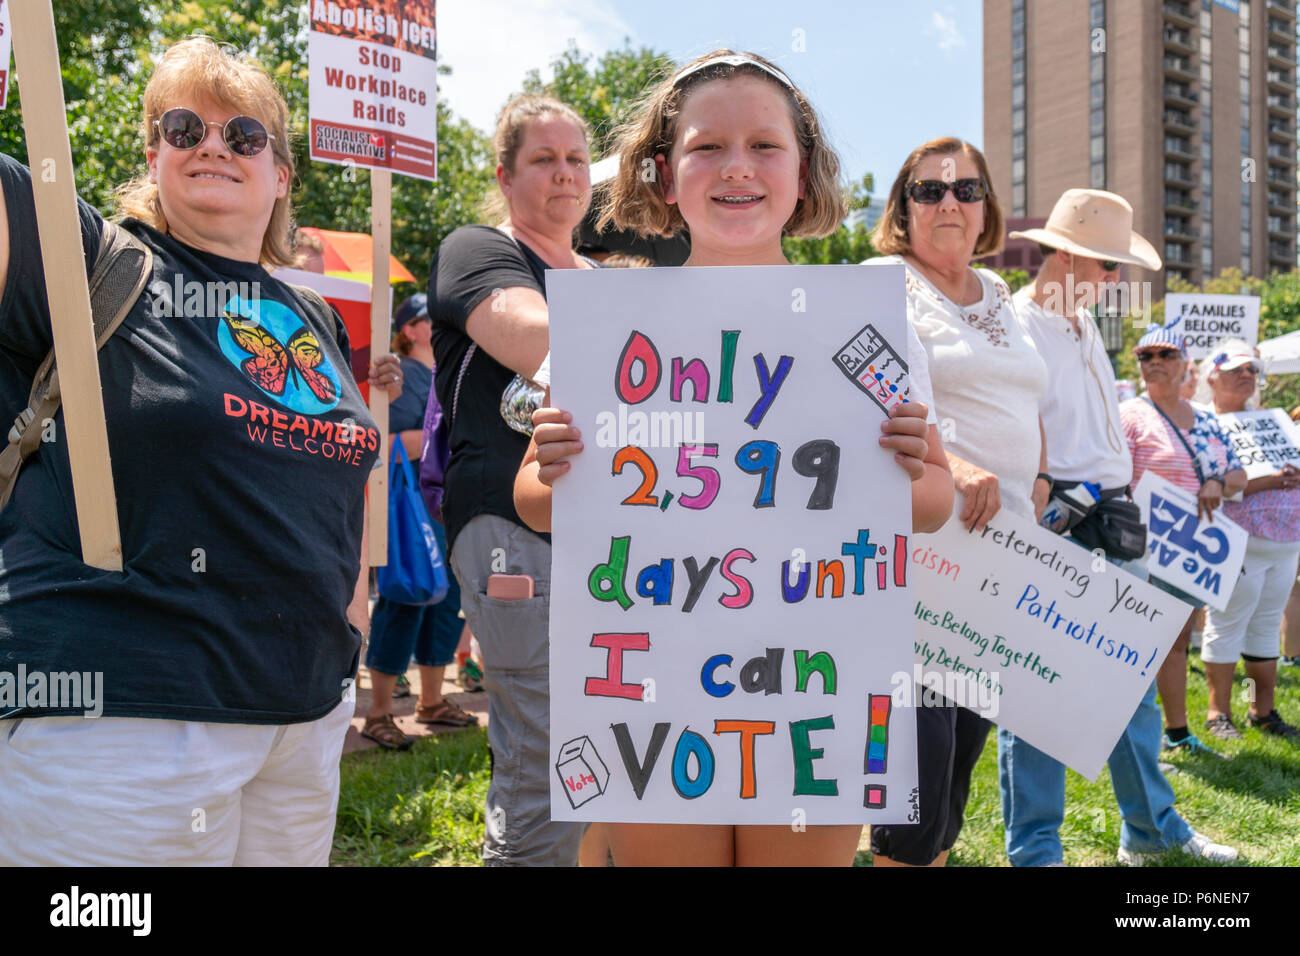 MINNEAPOLIS, MN/USA - JUNE 30, 2018: Unidentified individuals participating in the Families Belong Together march. Stock Photo